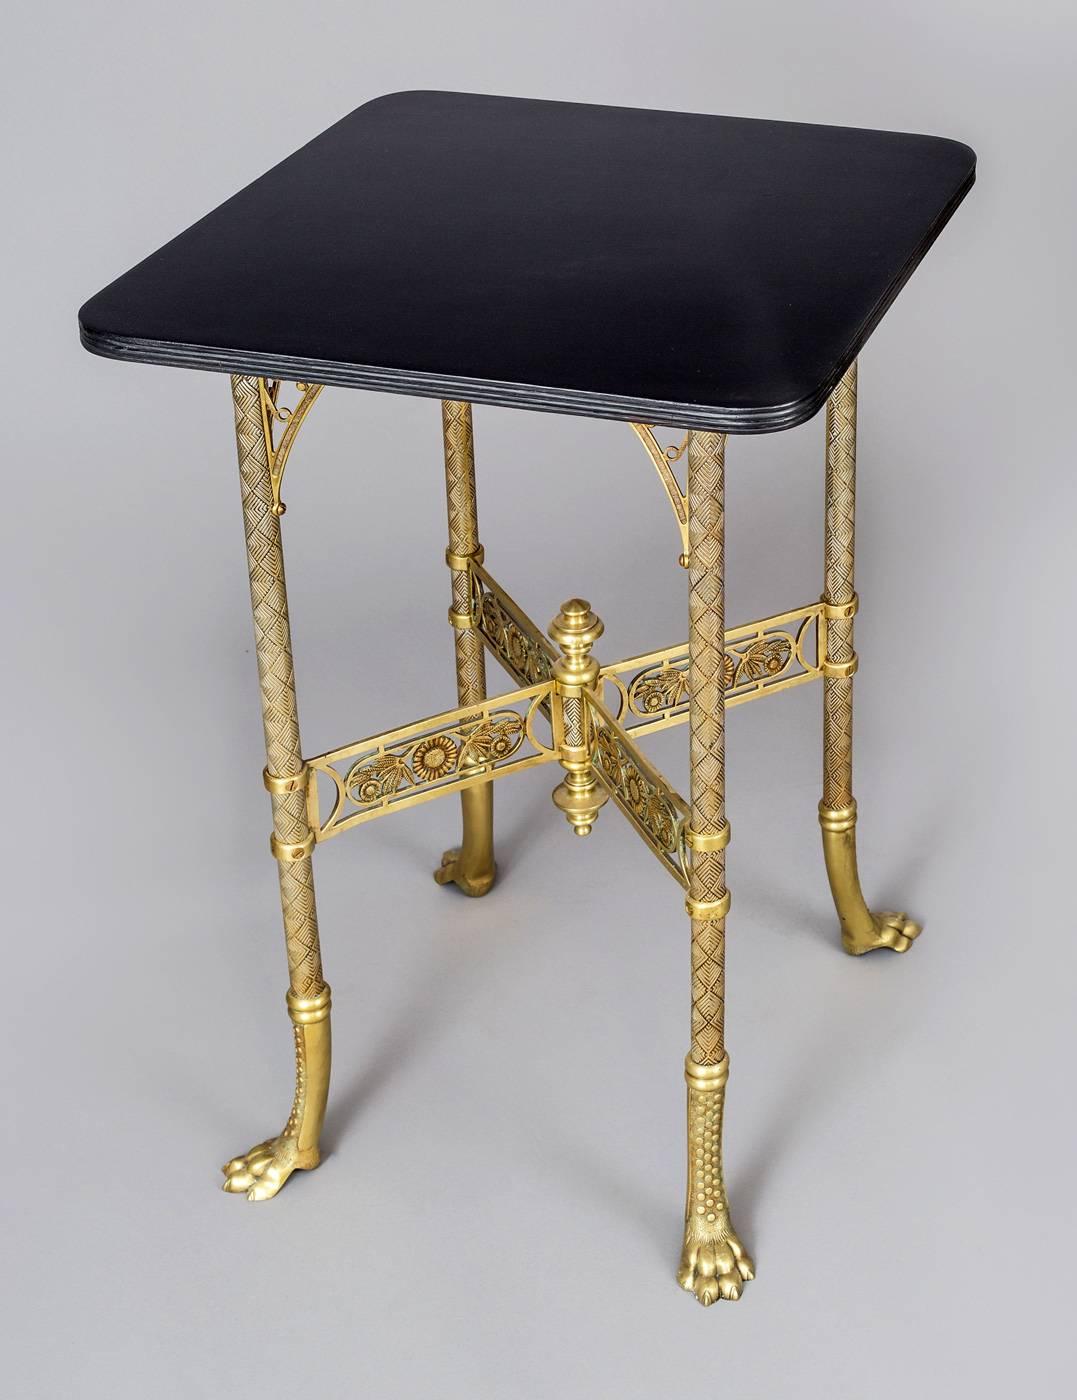 Cast American Aesthetic Movement Brass Table